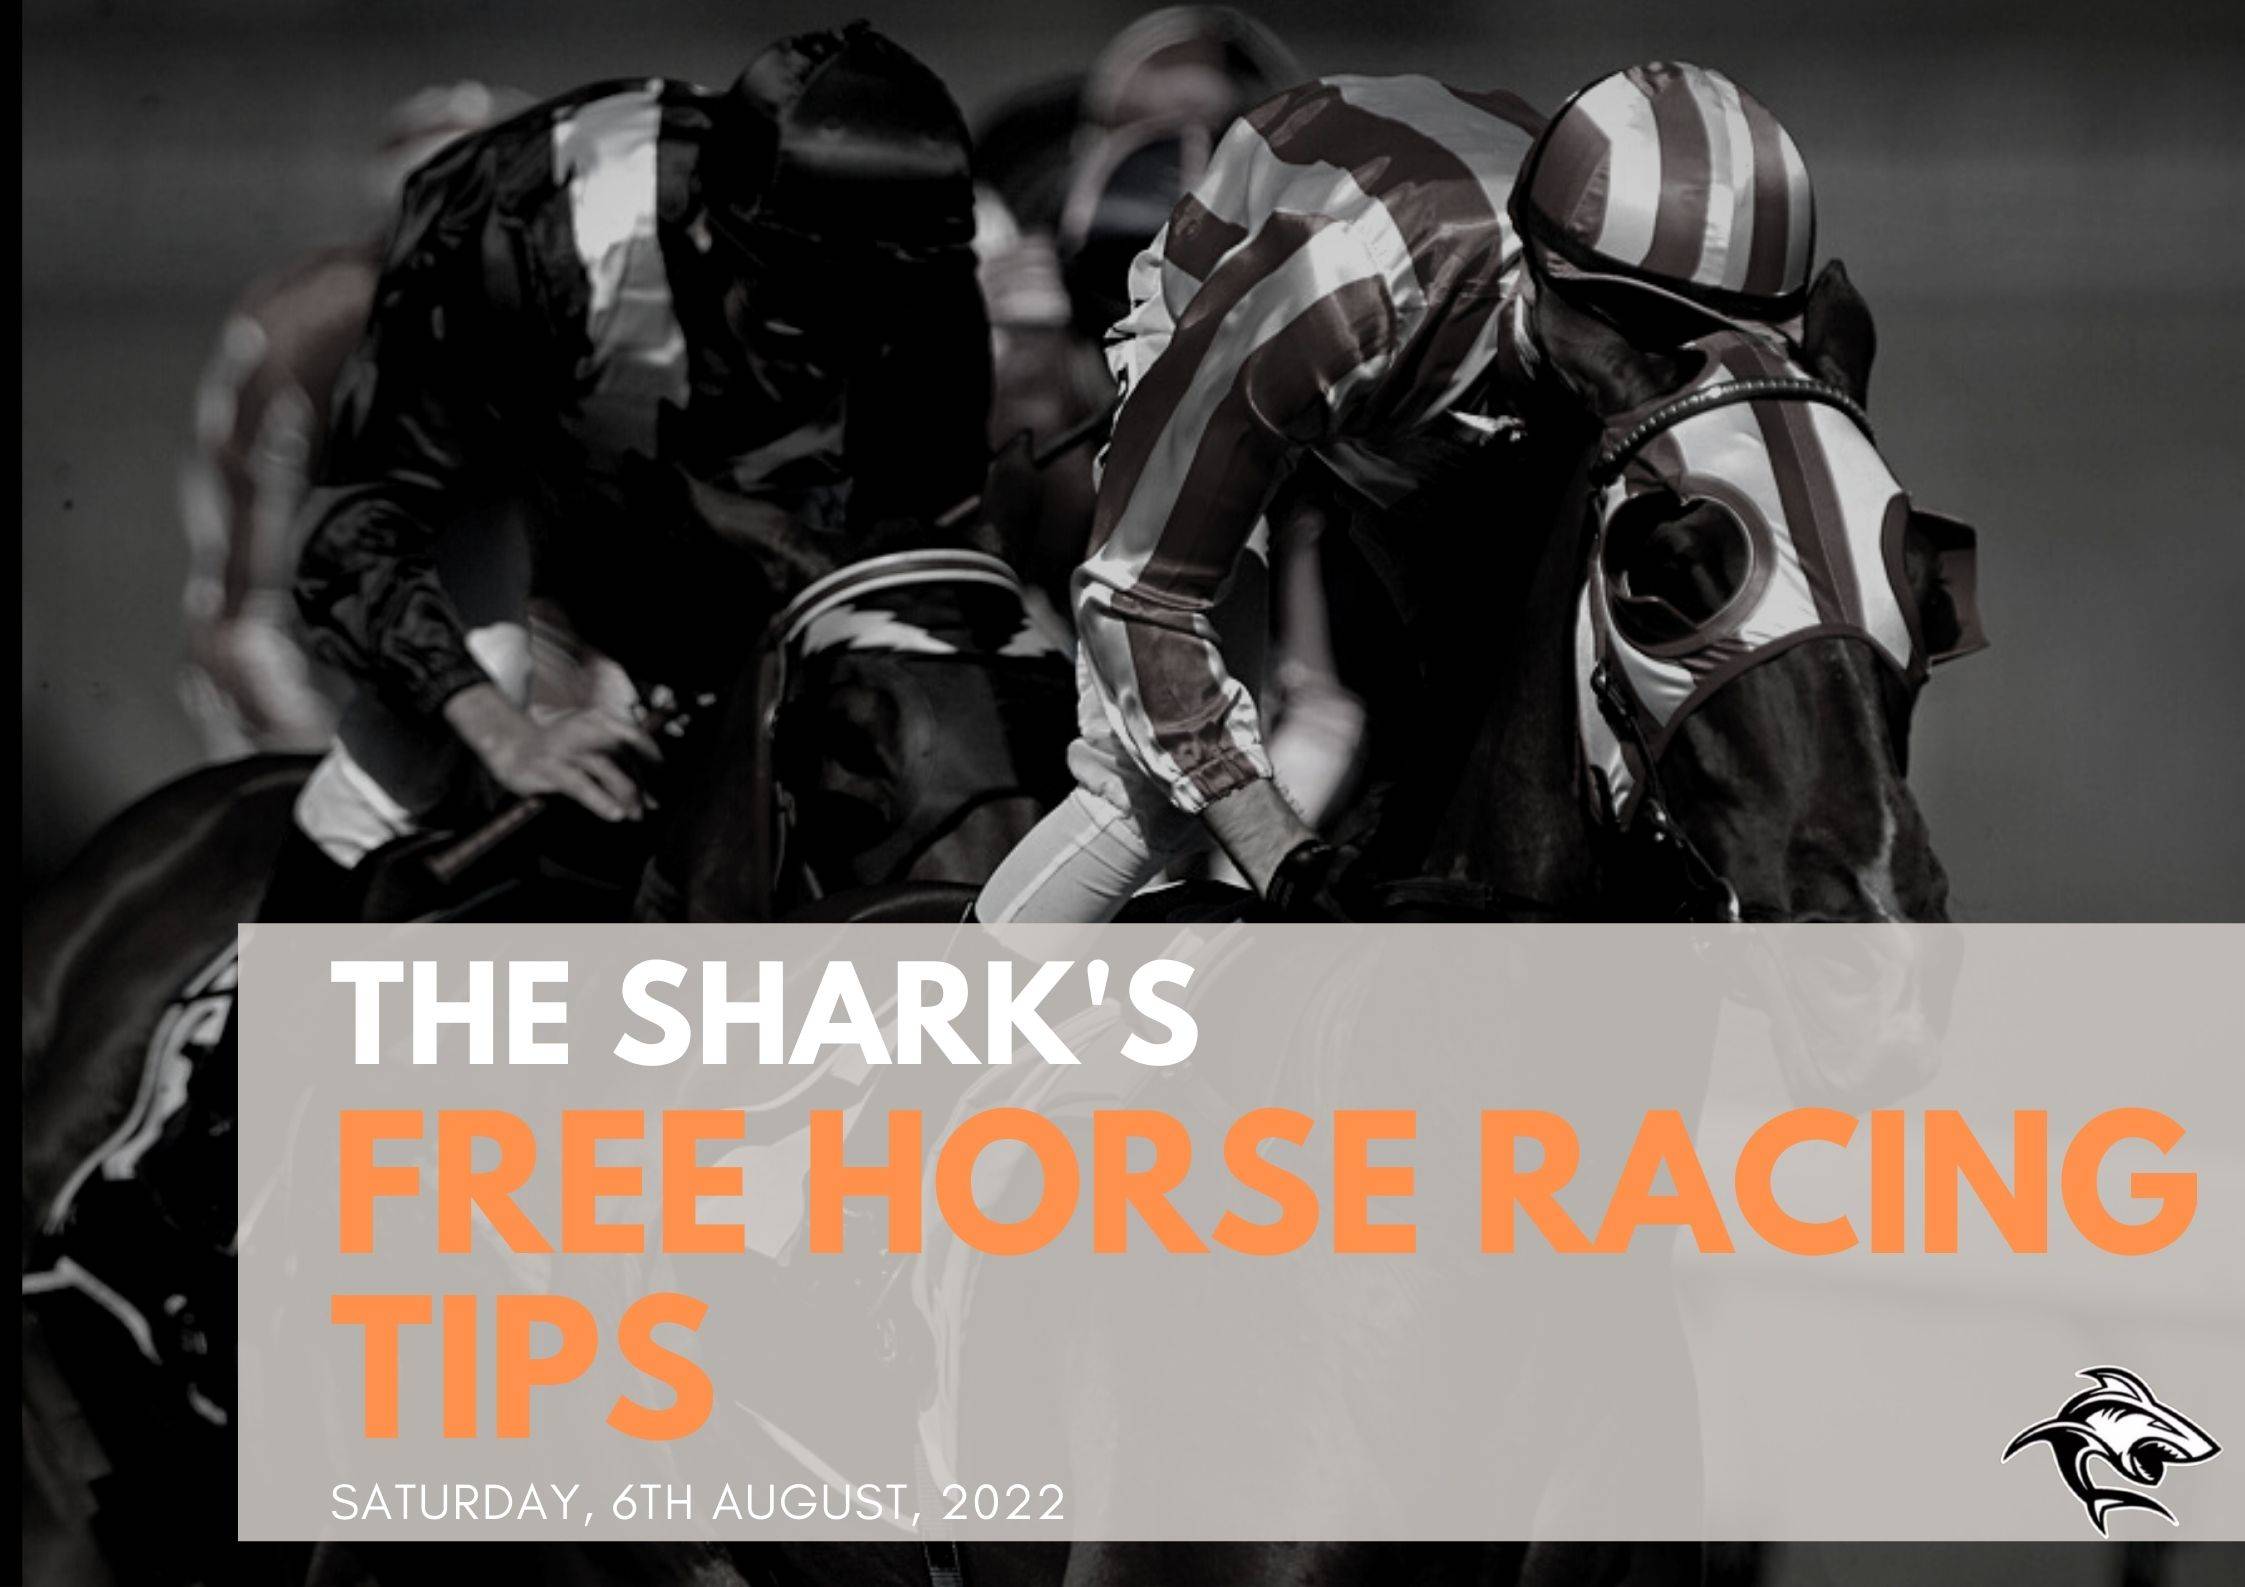 Free Horse Racing Tips - 6th Aug